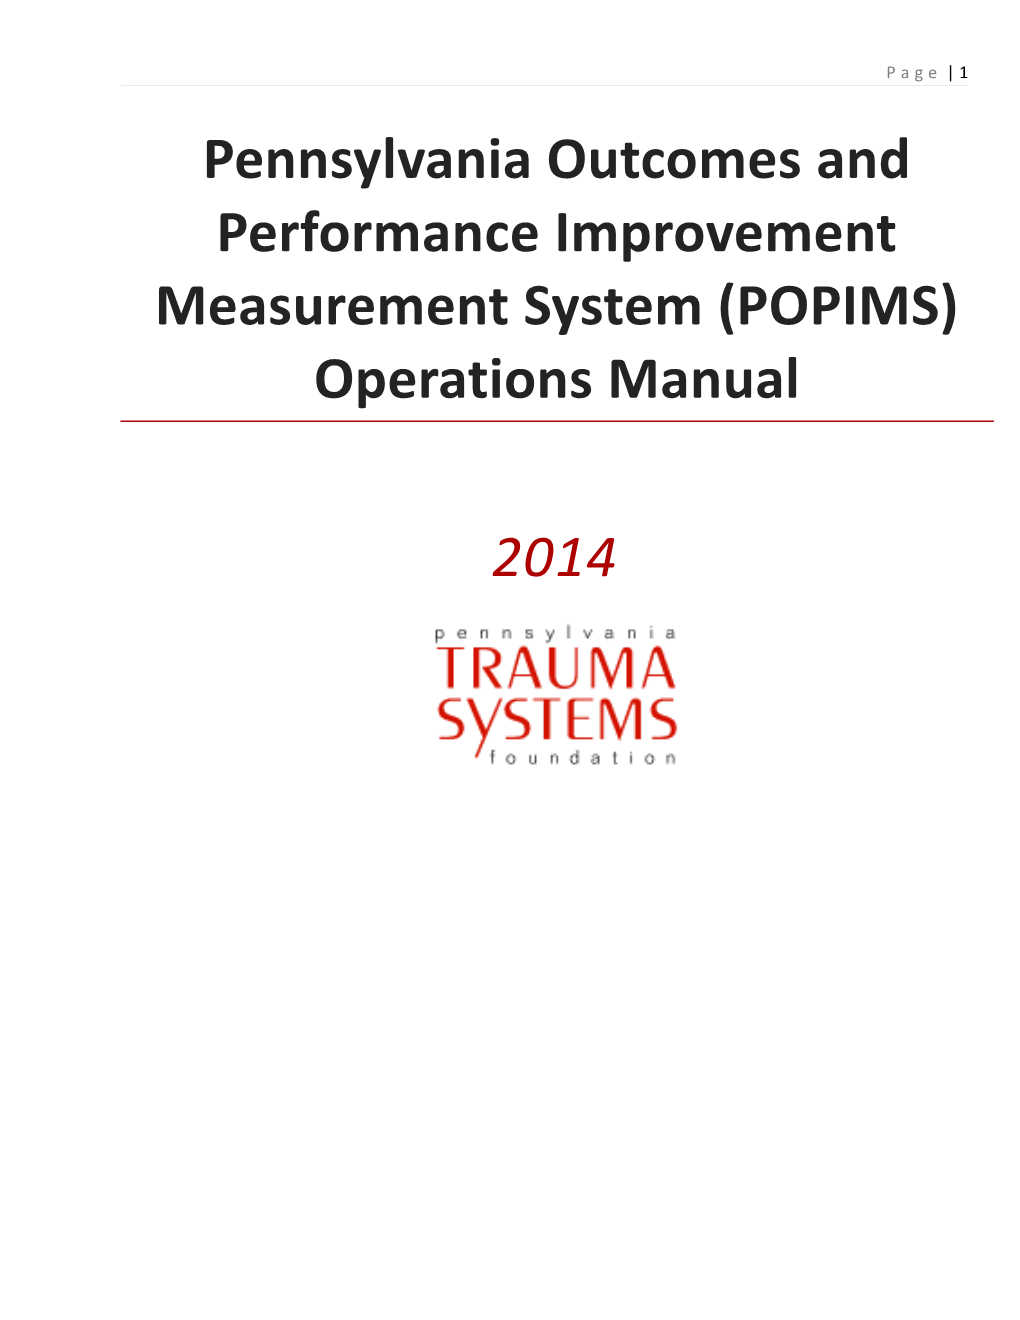 Pennsylvania Outcomes and Performance Improvement Measurement System (POPIMS) Operations Manual